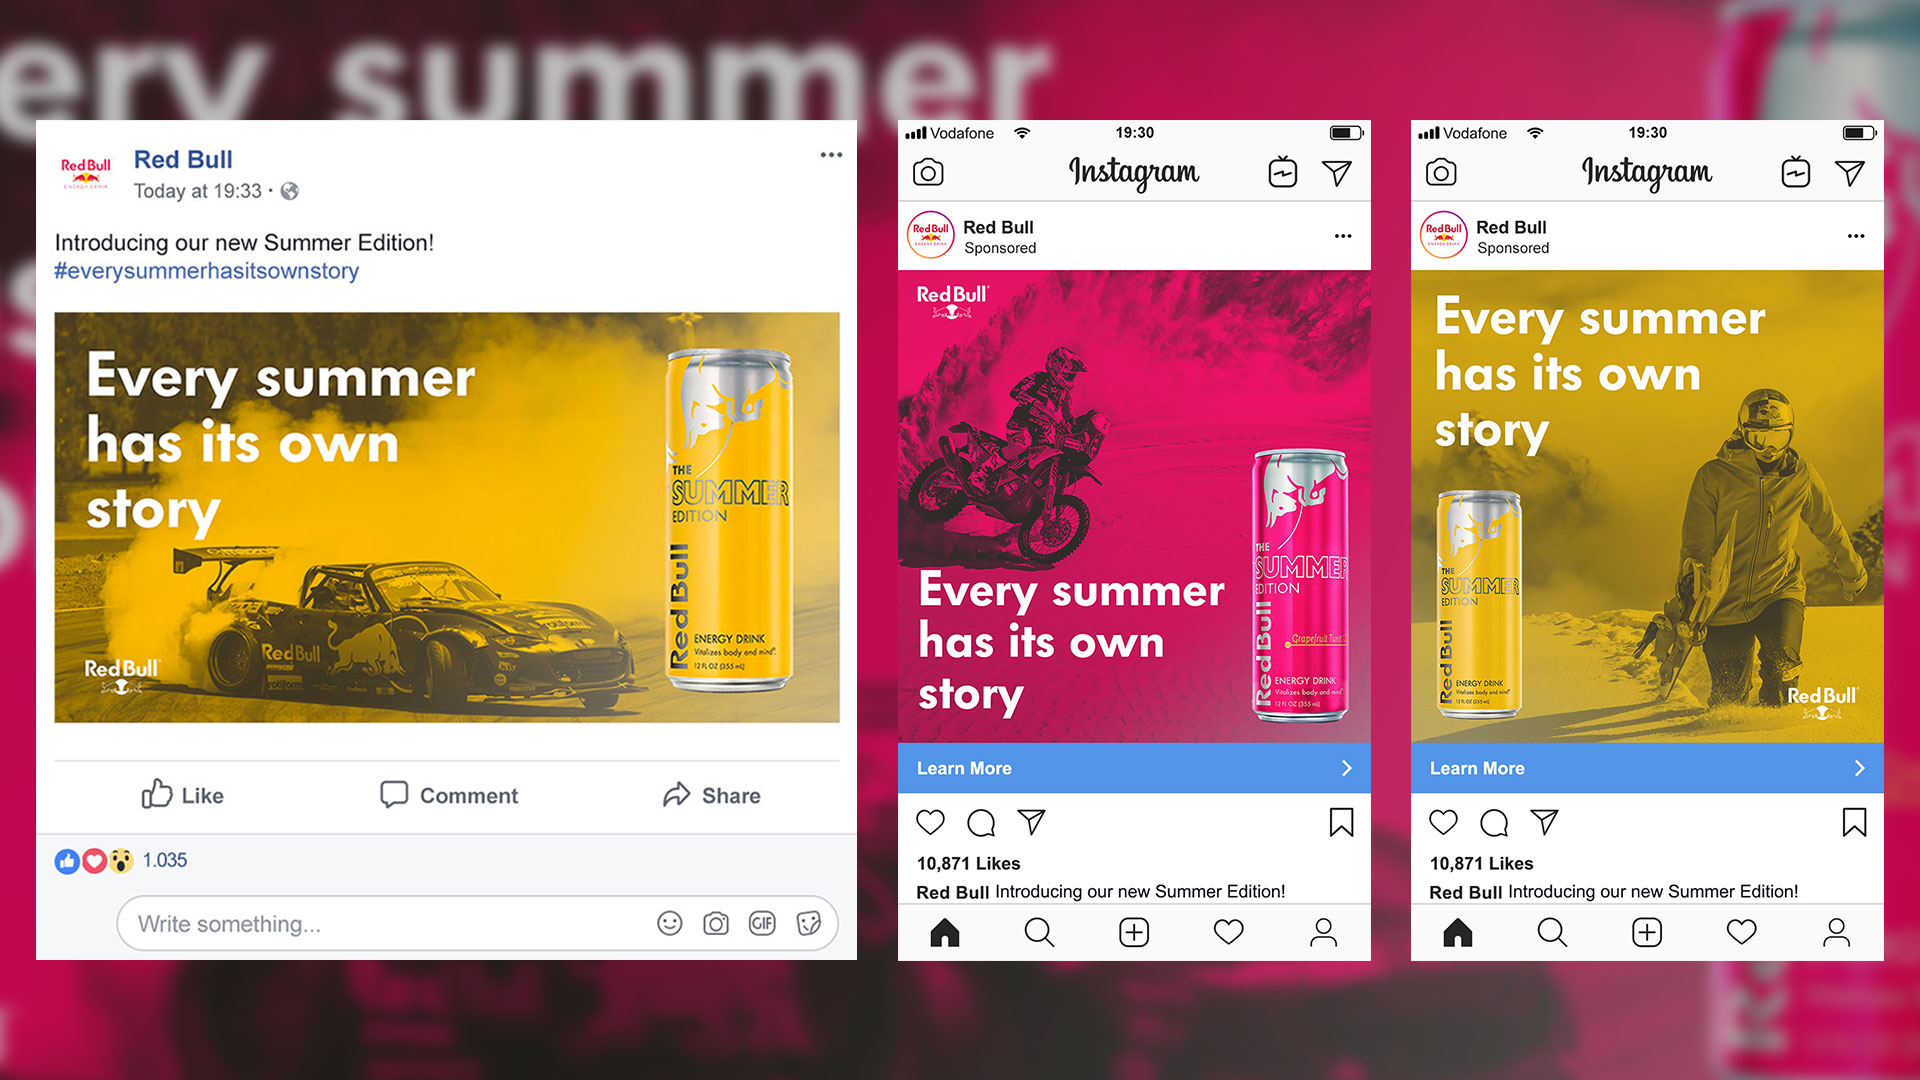 Composite image of multiple adverts mocked up in both Facebook and Instagram.